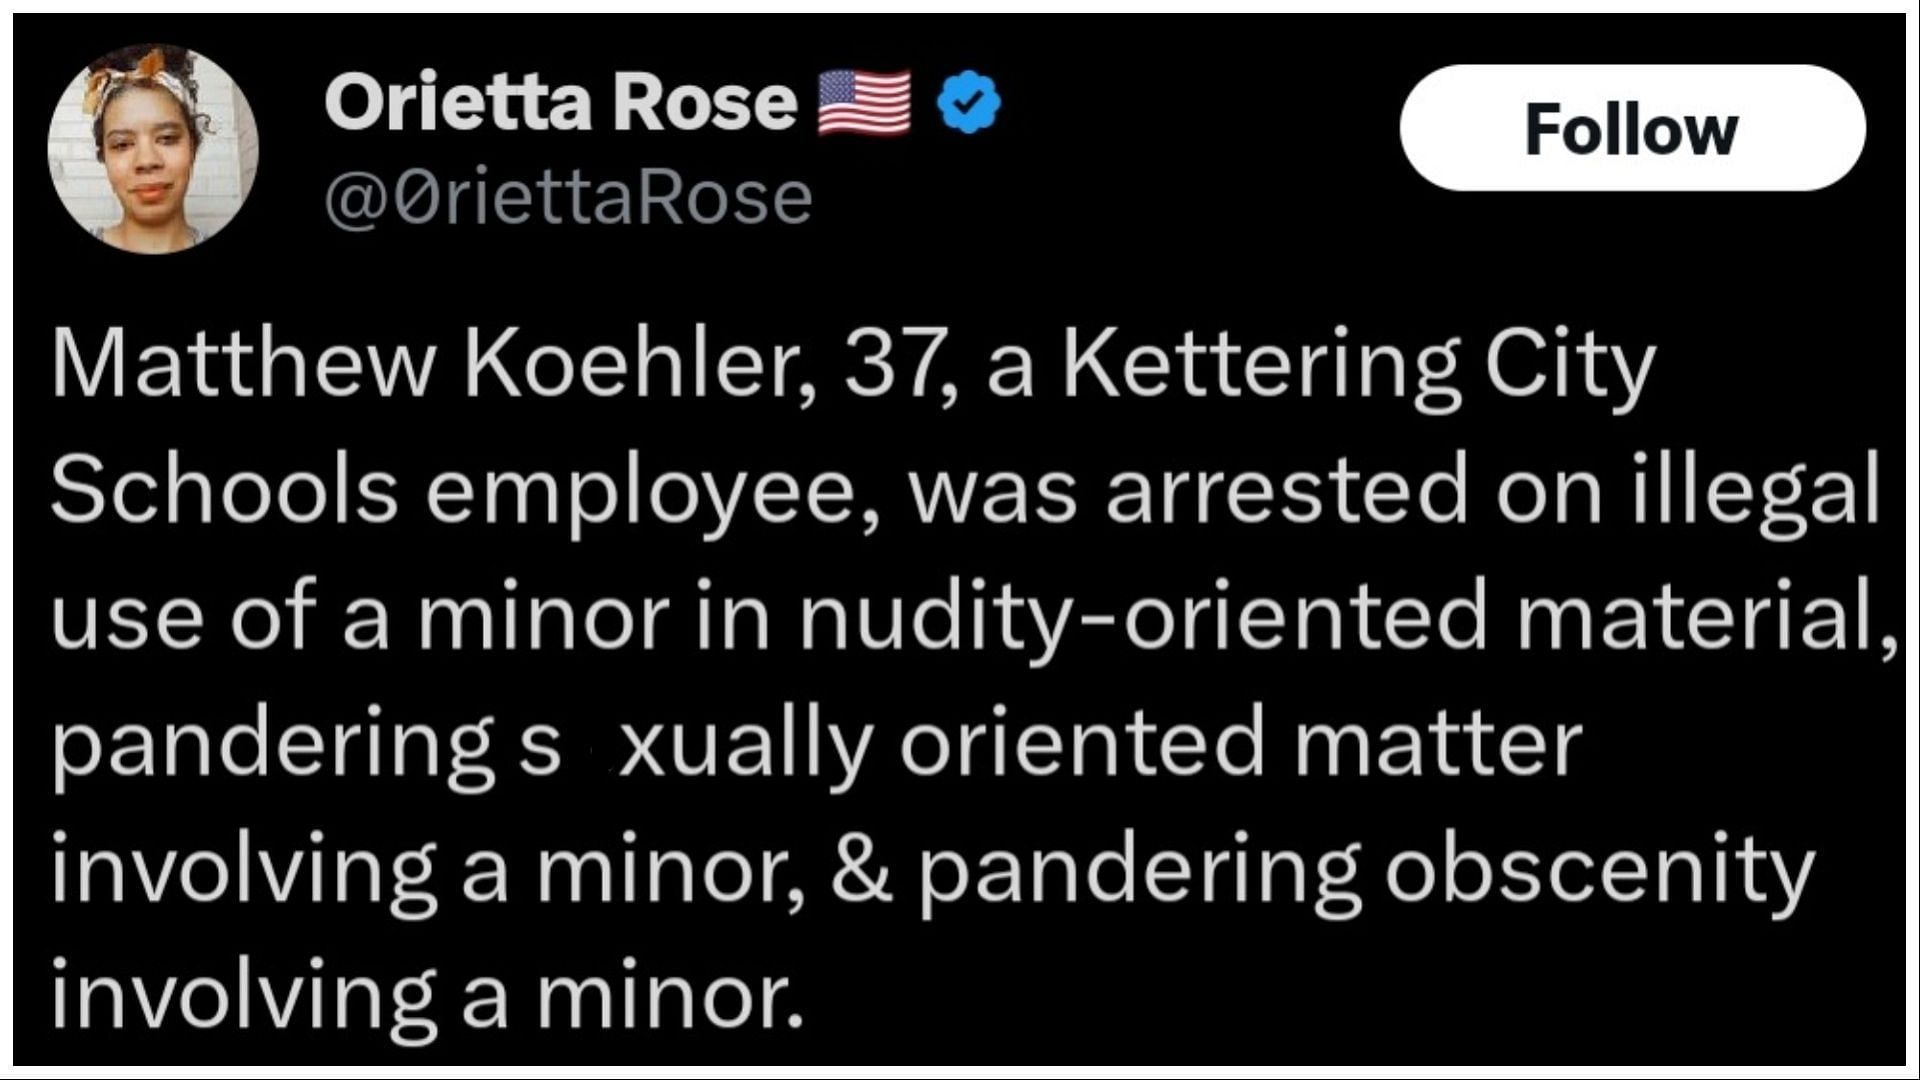 Koehler had allegedly touched the student inappropriately (Image via @OriettaRose/X)